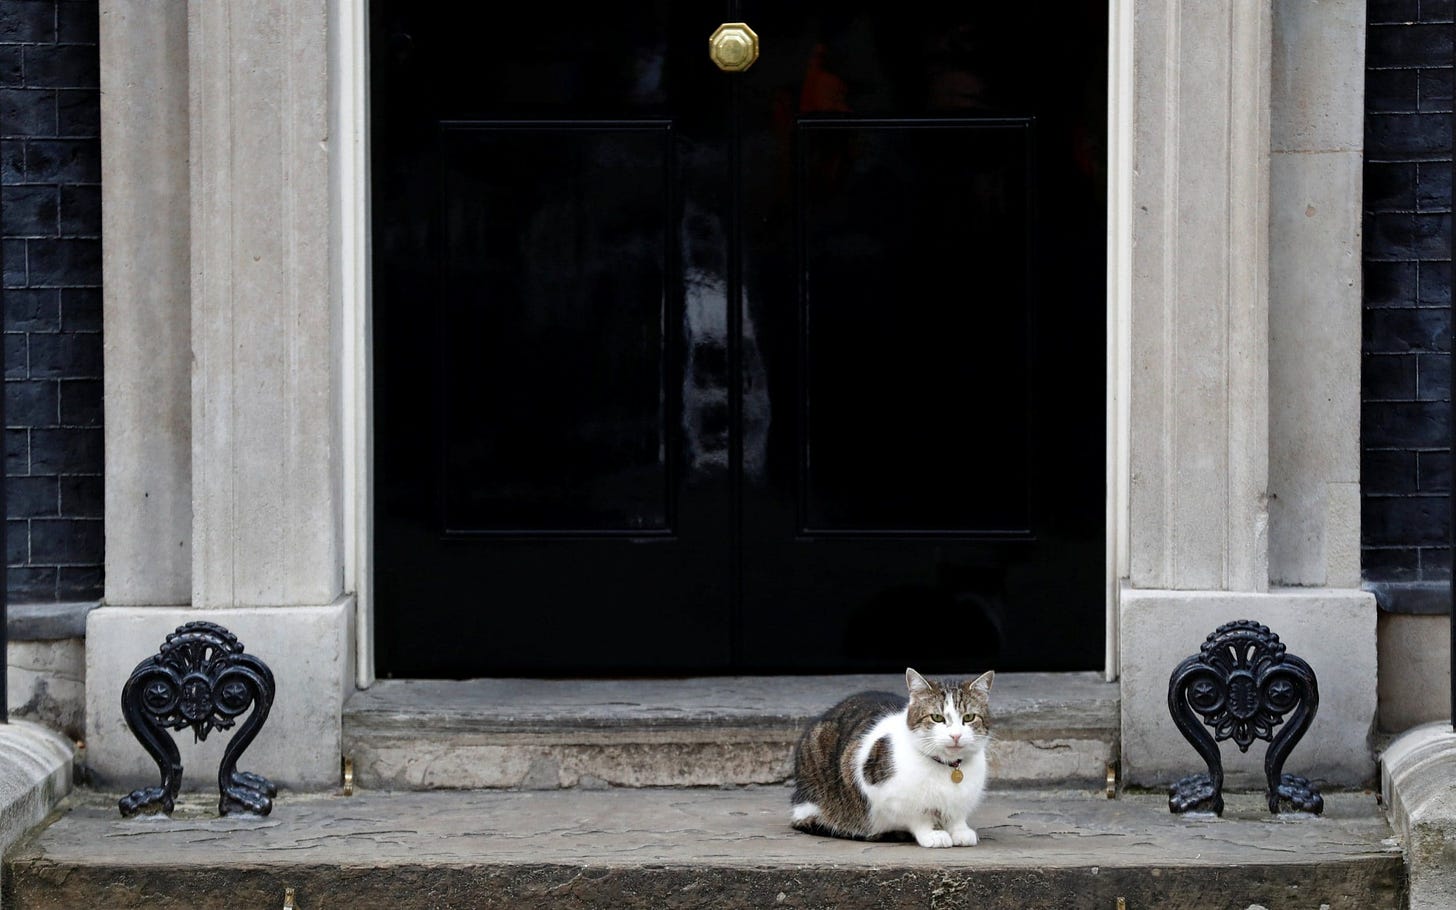 Larry the Downing Street cat under pressure after rat filmed scurrying past  No 10